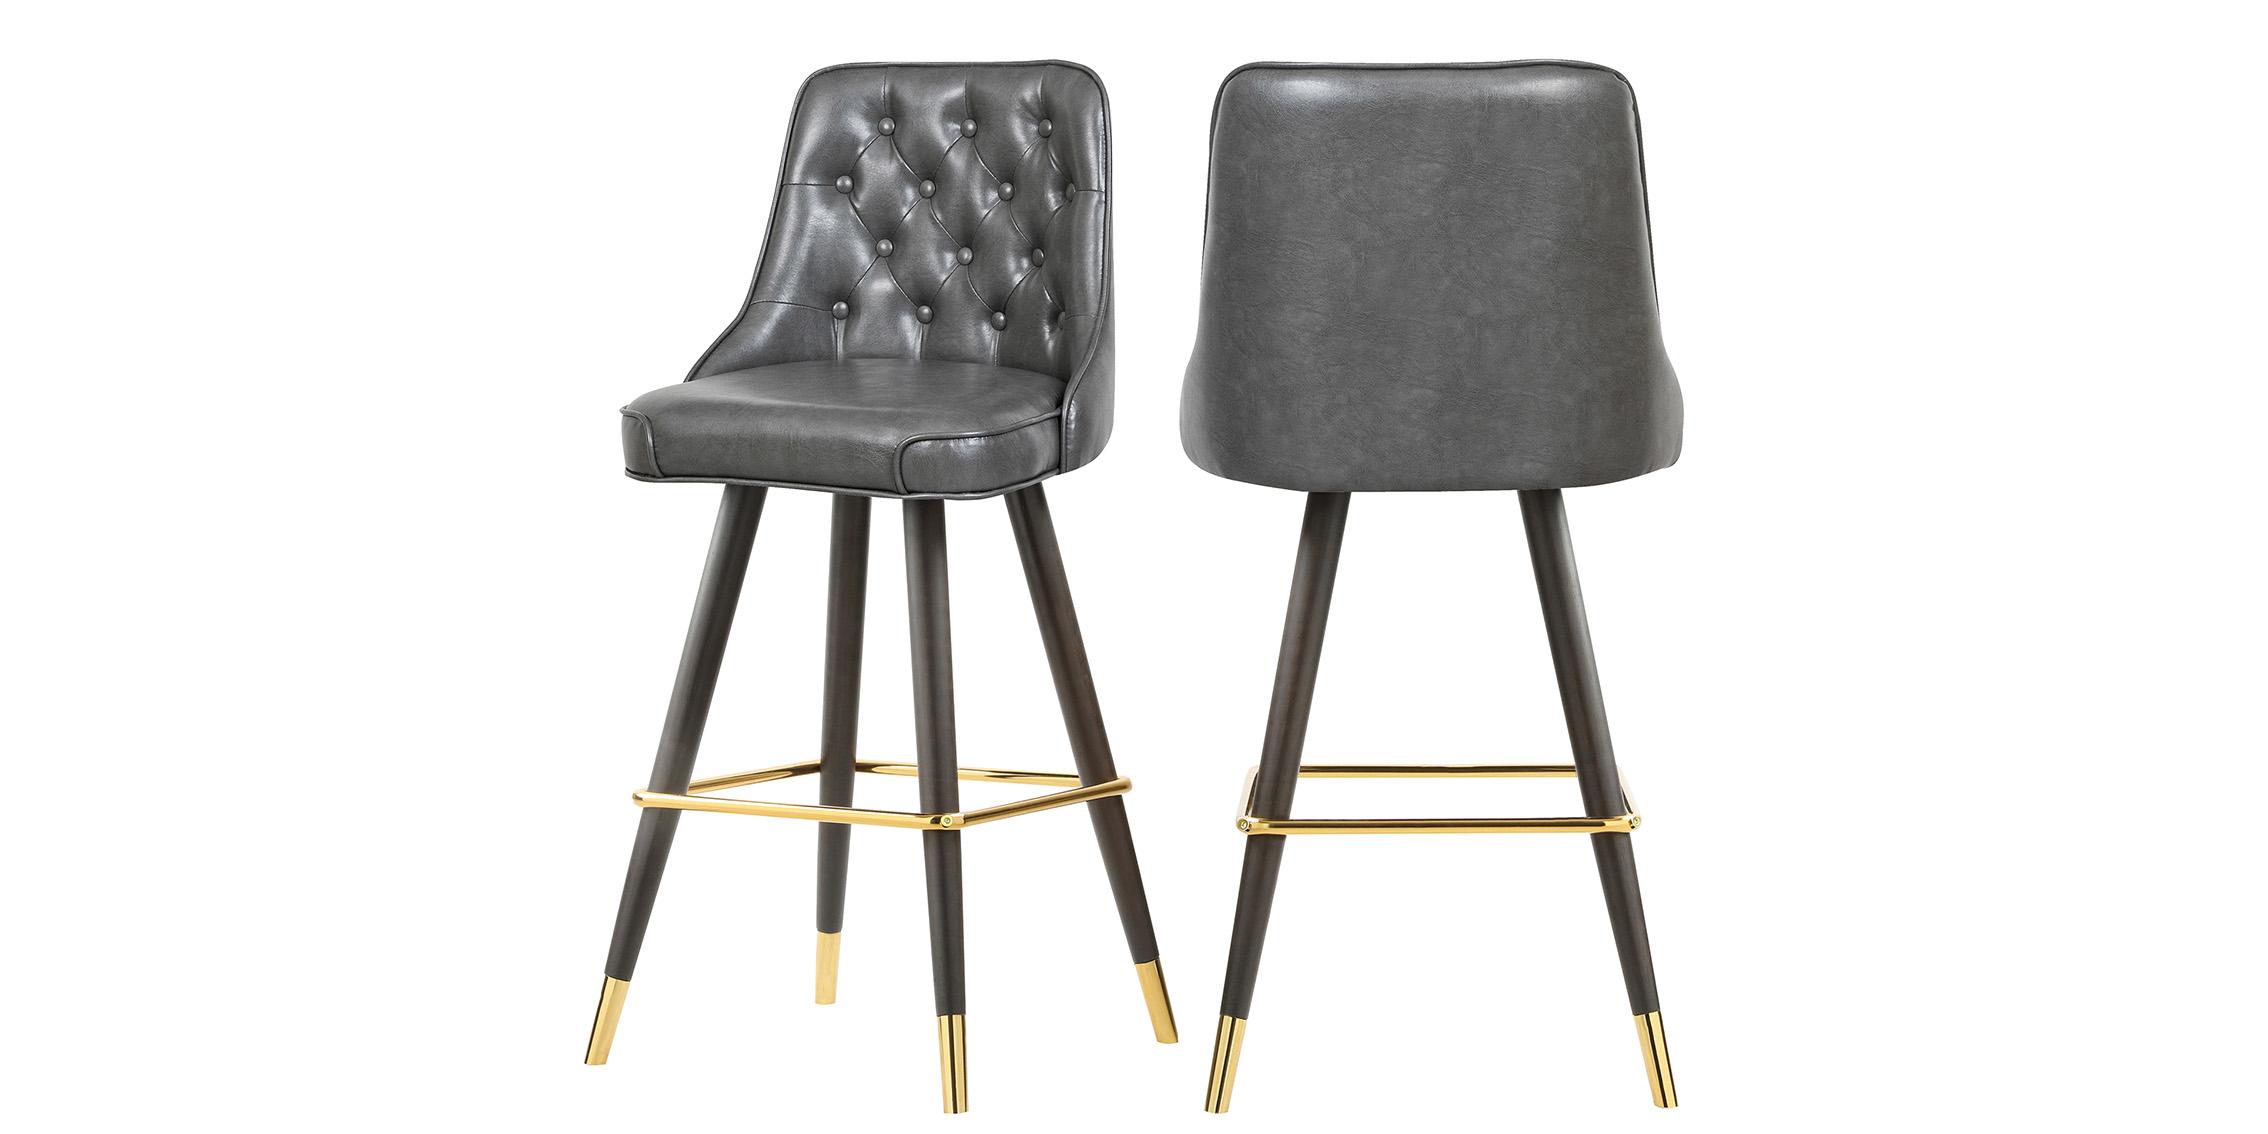 Contemporary, Modern Counter Stool Set PORTNOY 908Grey-C 908Grey-C in Gray Faux Leather